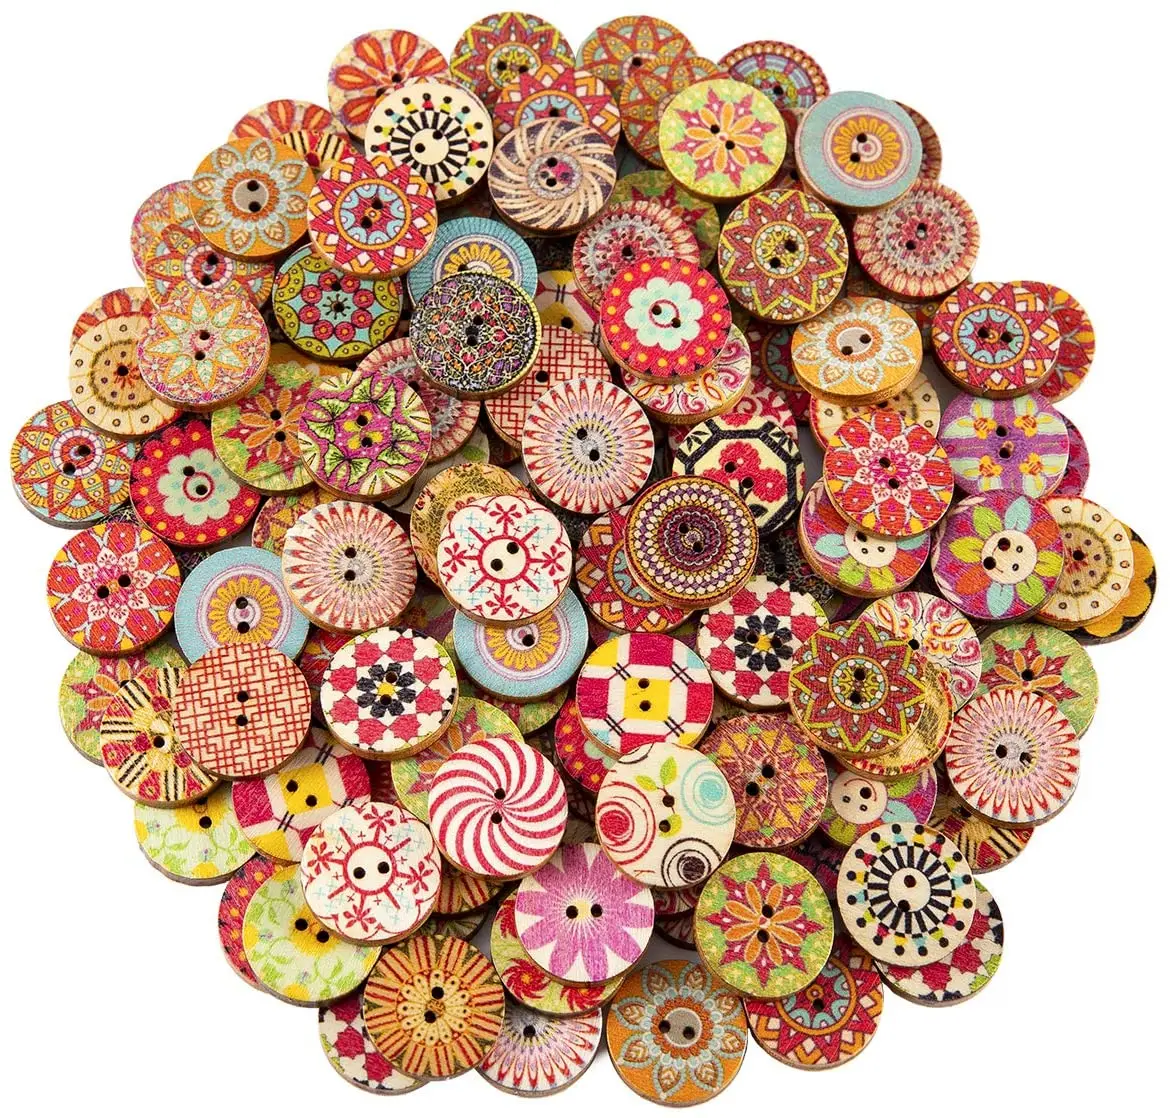 100pcs Mixed Random Flower Painting Round 2 Holes Wood Wooden Buttons for Sewing